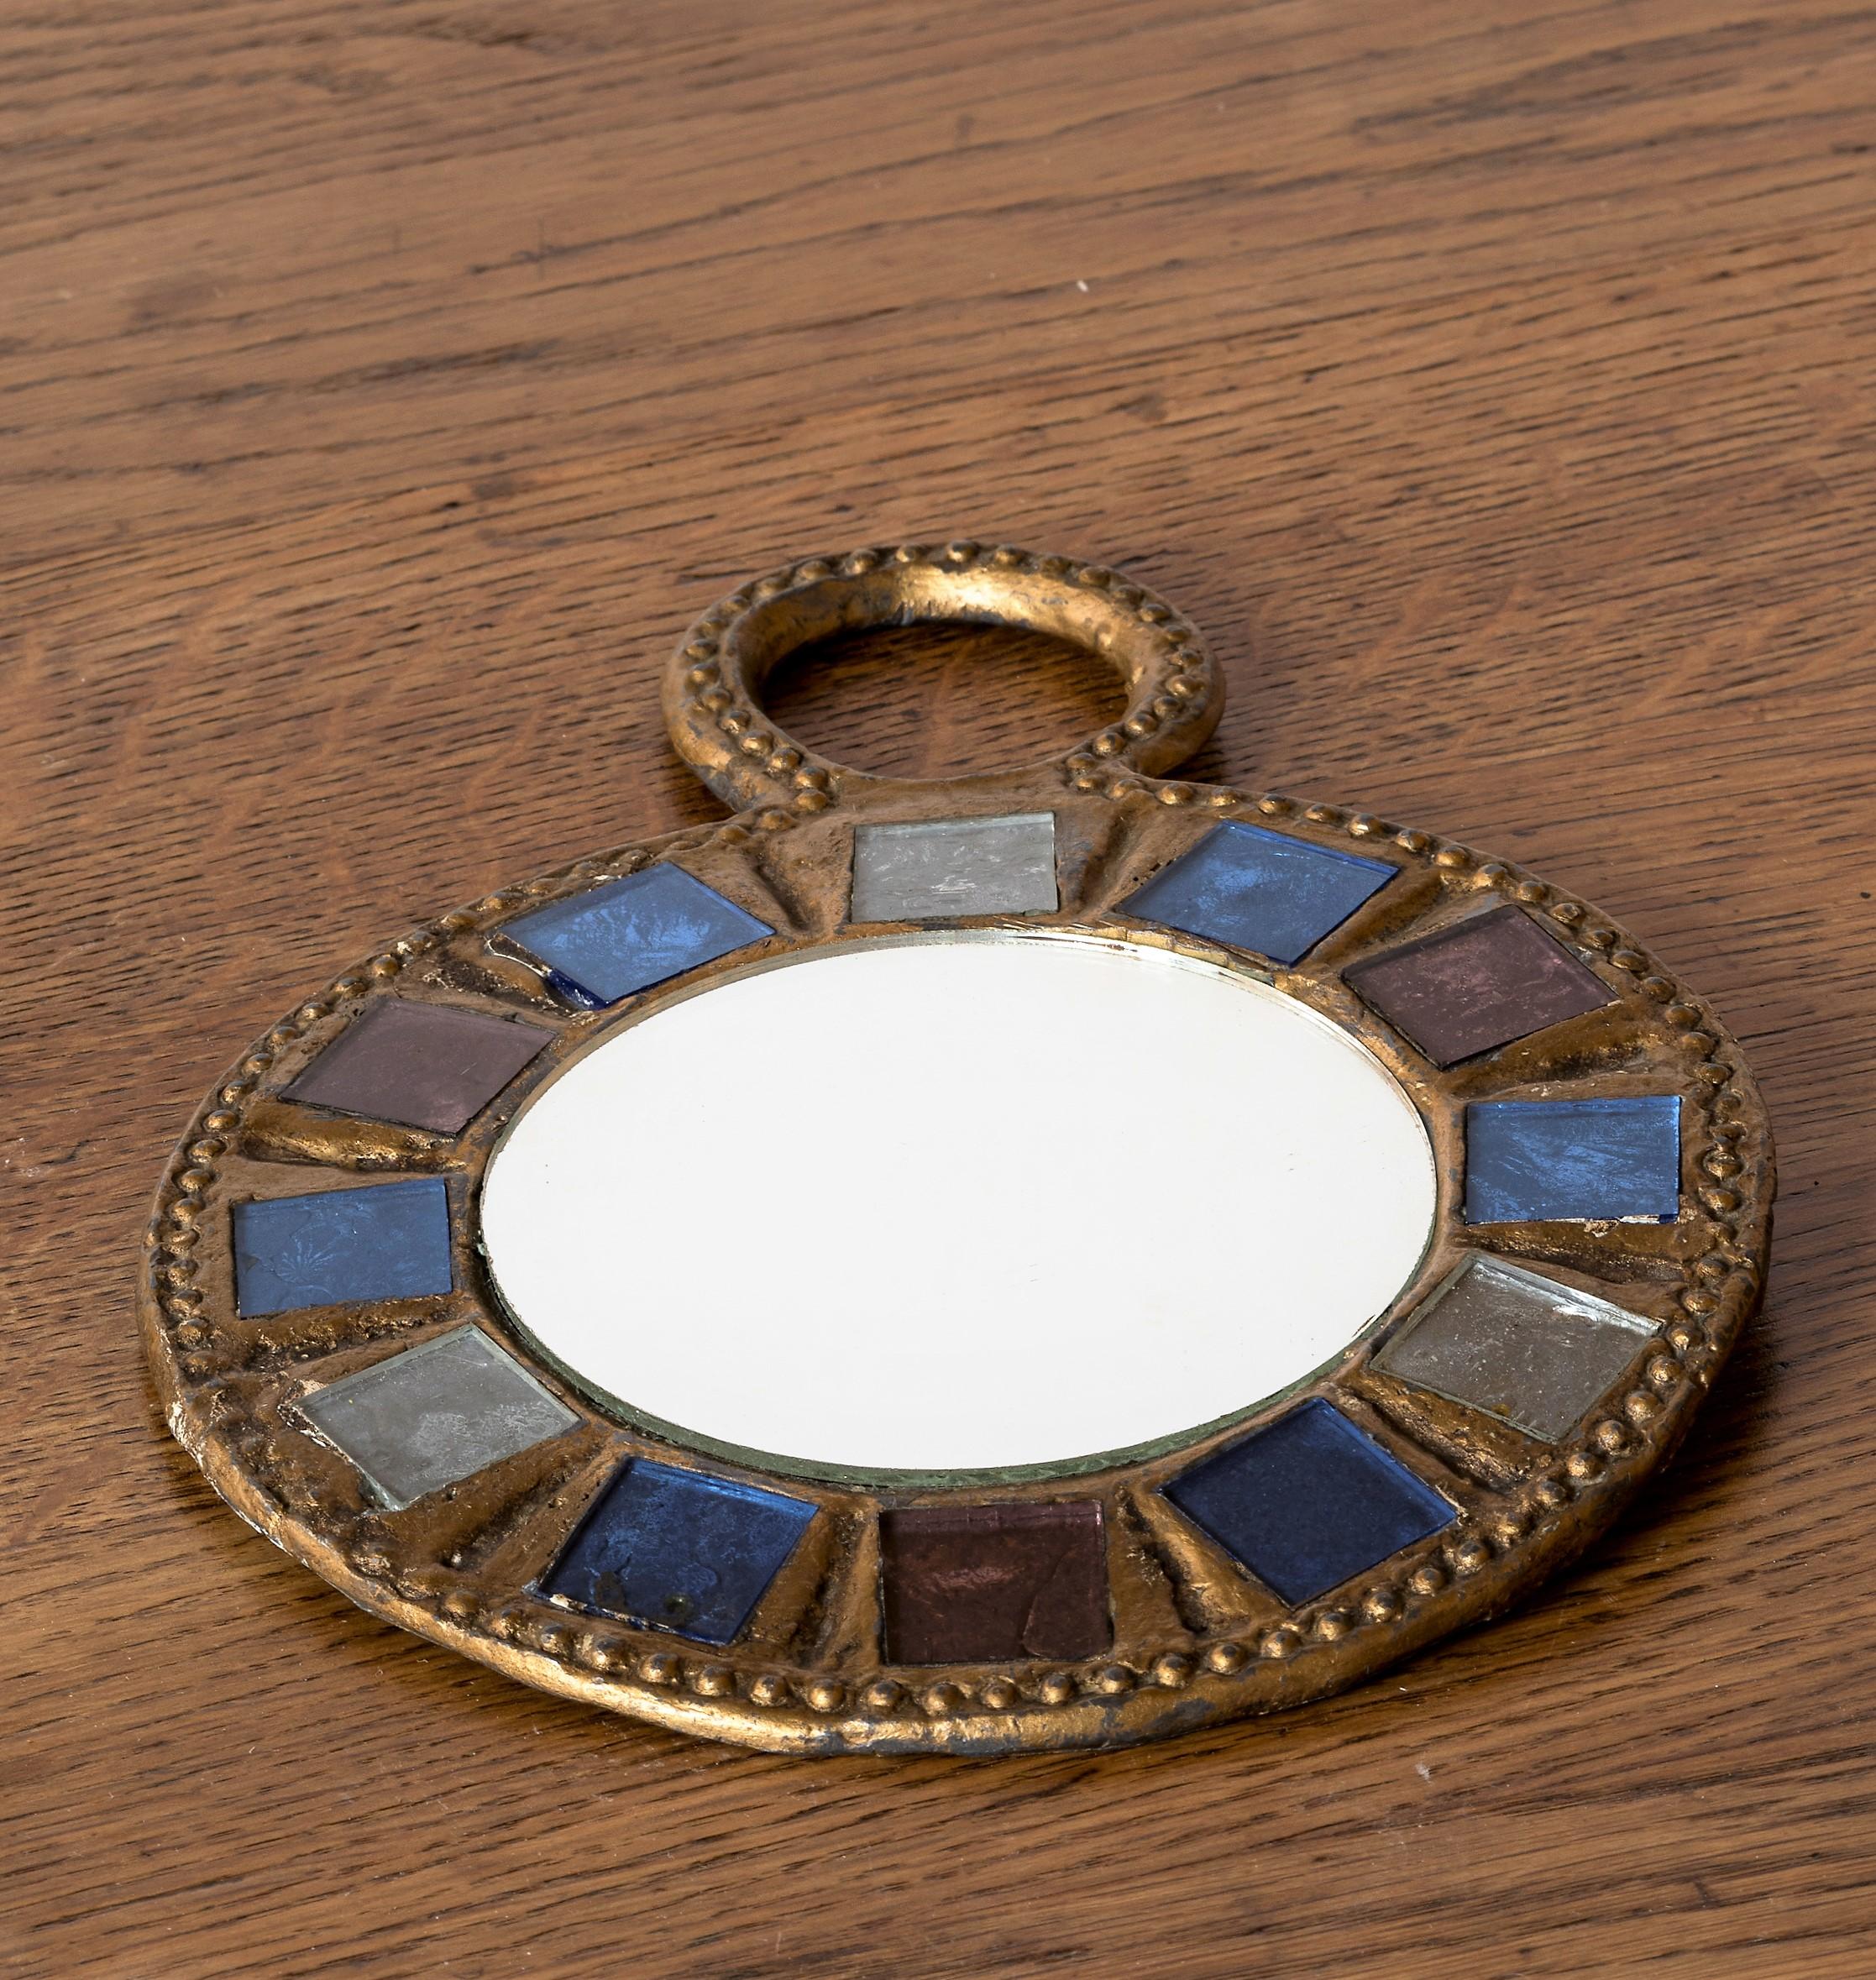 Metal wall mirror or hand mirror with green and blue talosel inlays by Irina Jaworska ( Line Vautrin School ), France 1970s.
Lead framed gilt mirorr with pressed pattern and talosel inlays in shades of green and blue surrounding a round golden